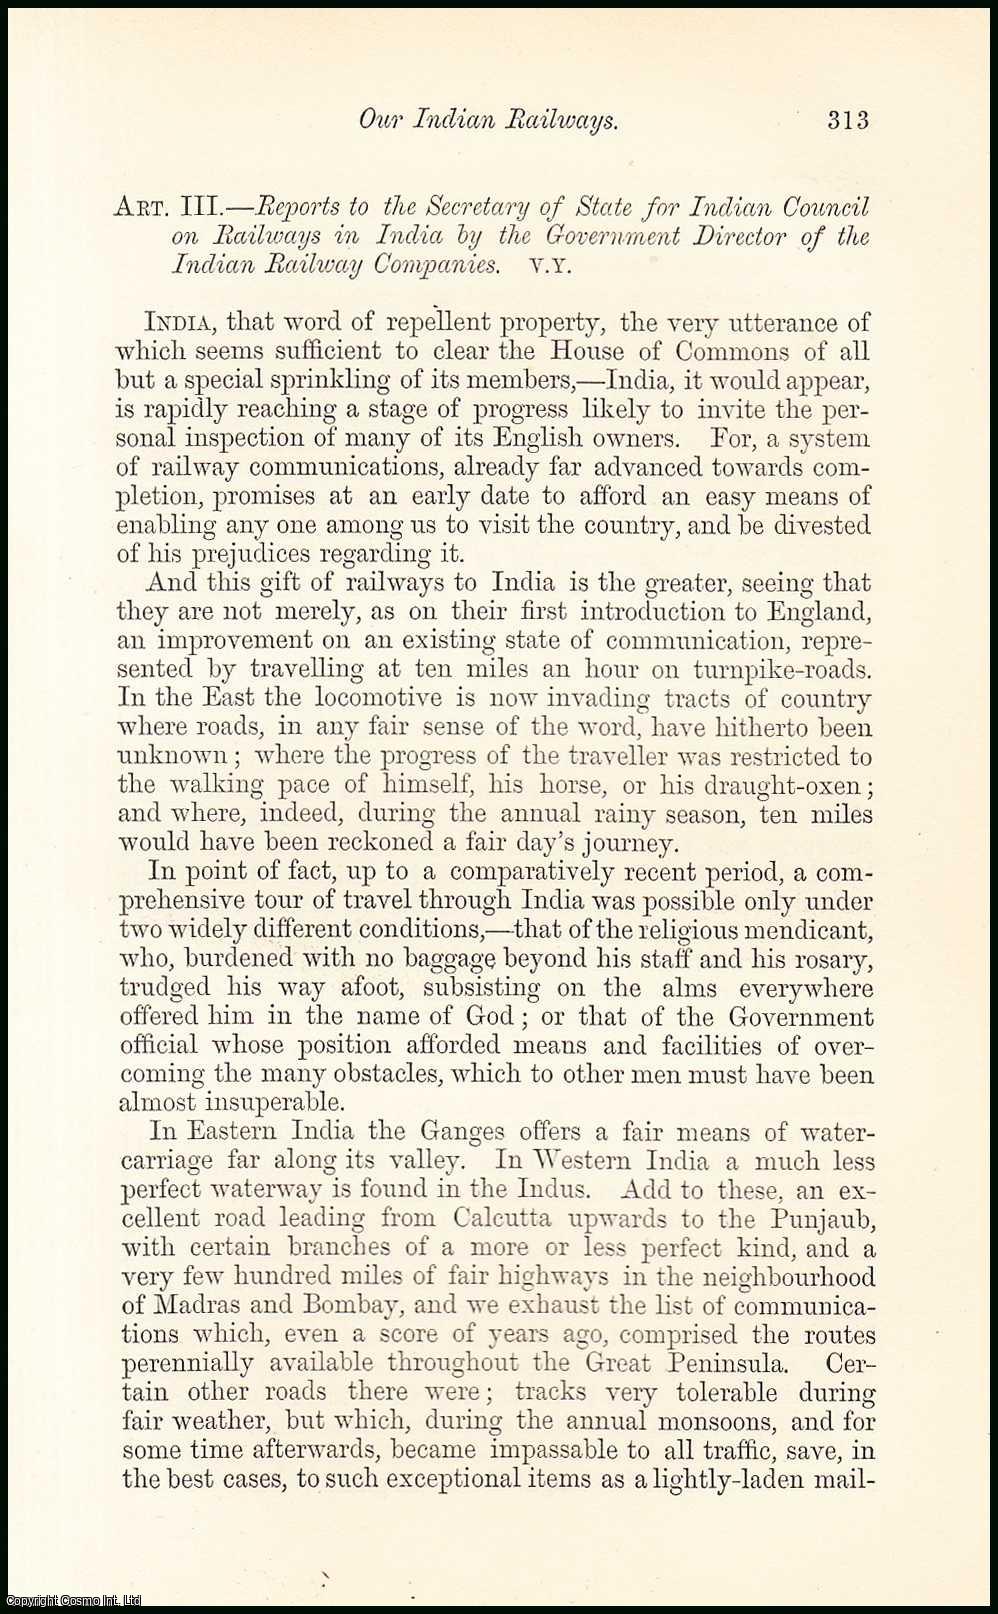 Robert Preston Malcolm - Our Indian Railways. An uncommon original article from the North British Review, 1868.